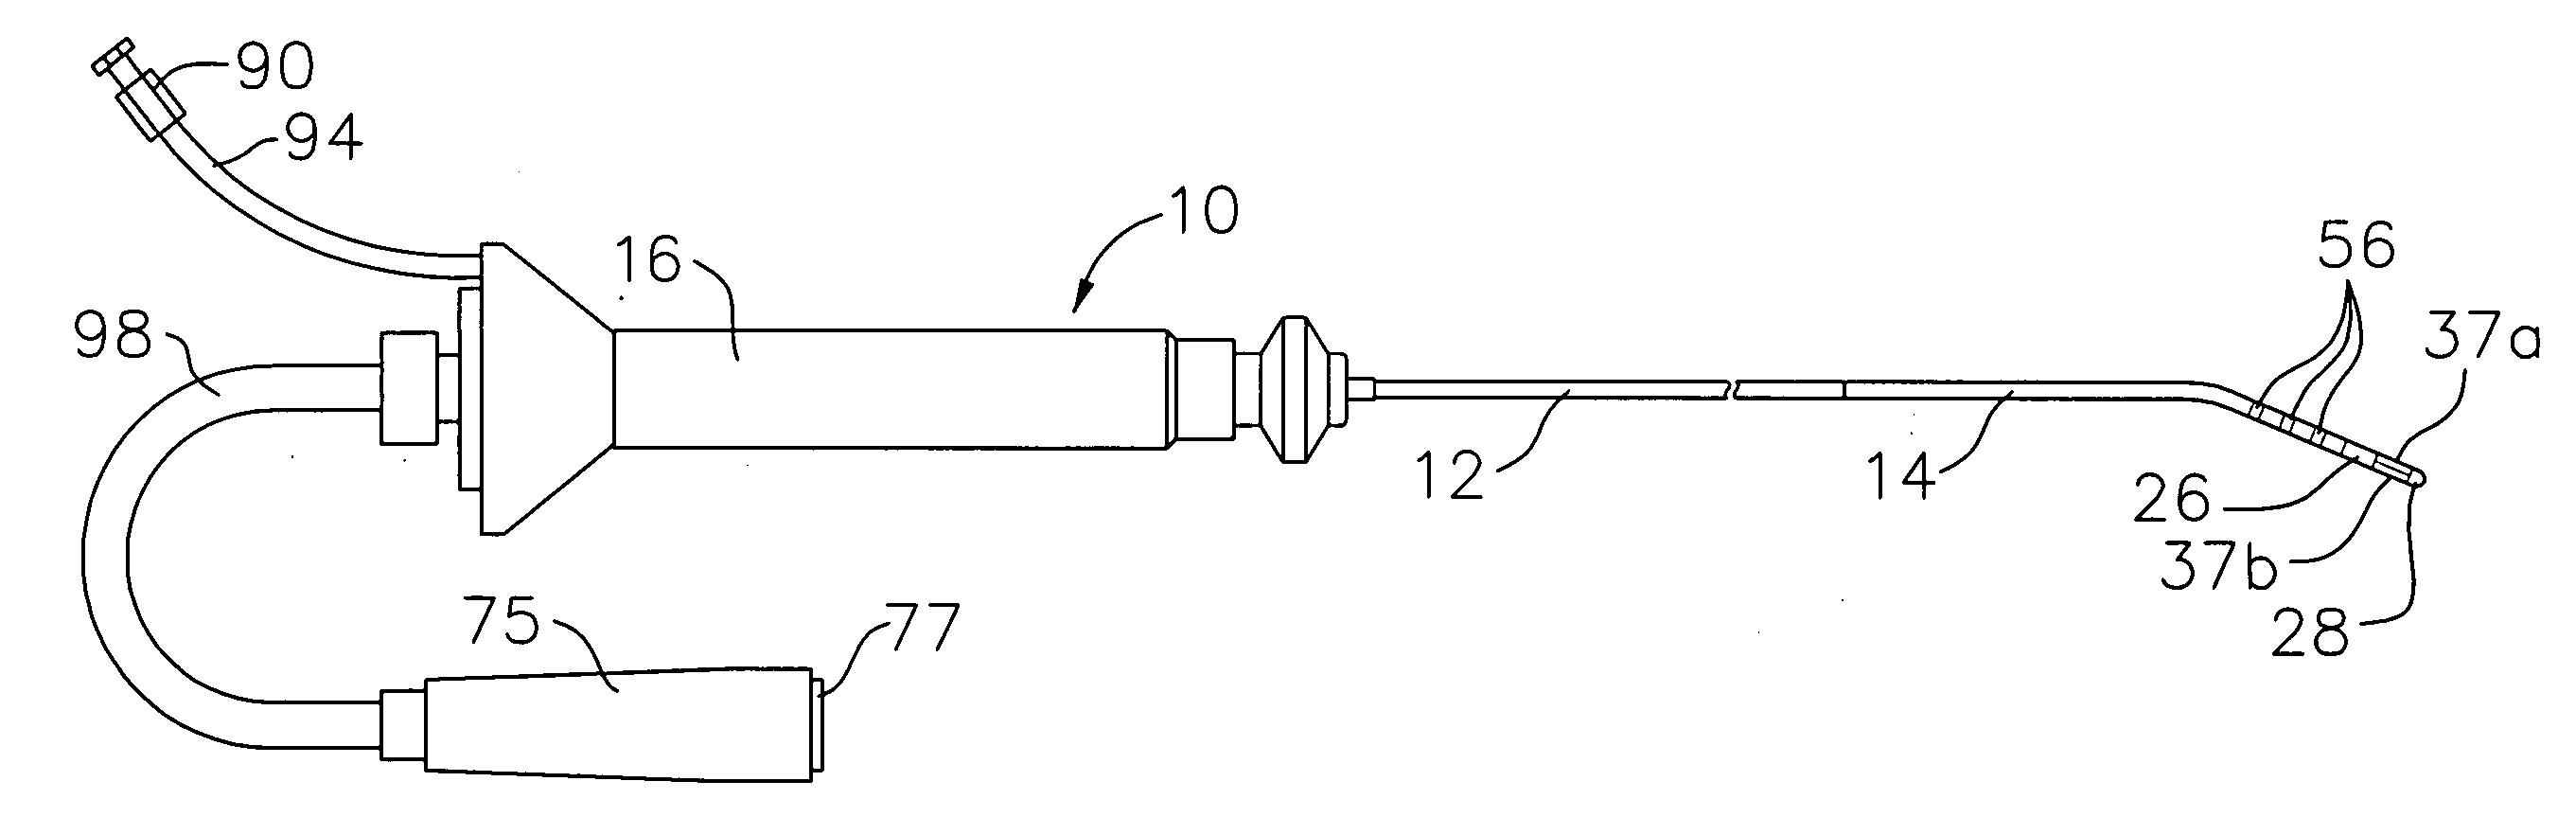 System and method for selectively energizing catheter electrodes